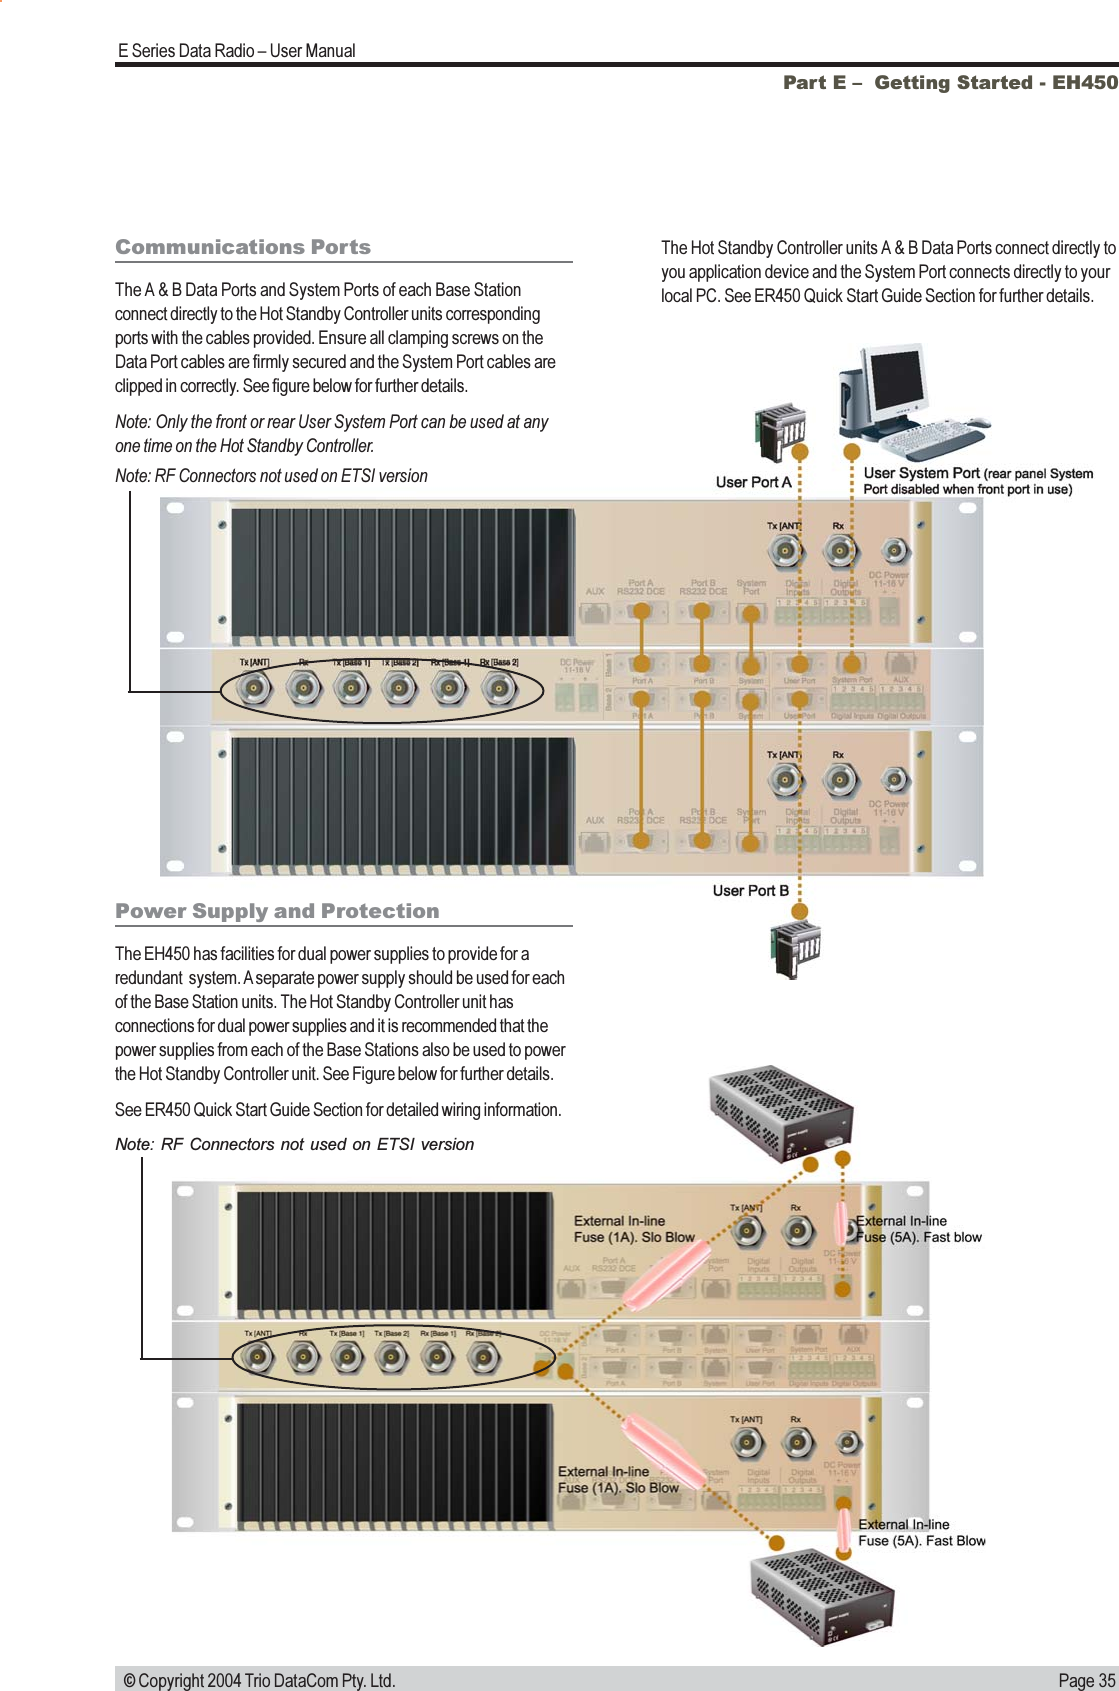 Page 35E Series Data Radio  User Manual © Copyright 2004 Trio DataCom Pty. Ltd.Communications PortsThe A &amp; B Data Ports and System Ports of each Base Stationconnect directly to the Hot Standby Controller units correspondingports with the cables provided. Ensure all clamping screws on theData Port cables are firmly secured and the System Port cables areclipped in correctly. See figure below for further details.Note: Only the front or rear User System Port can be used at anyone time on the Hot Standby Controller.Power Supply and ProtectionThe EH450 has facilities for dual power supplies to provide for aredundant  system. A separate power supply should be used for eachof the Base Station units. The Hot Standby Controller unit hasconnections for dual power supplies and it is recommended that thepower supplies from each of the Base Stations also be used to powerthe Hot Standby Controller unit. See Figure below for further details.See ER450 Quick Start Guide Section for detailed wiring information.The Hot Standby Controller units A &amp; B Data Ports connect directly toyou application device and the System Port connects directly to yourlocal PC. See ER450 Quick Start Guide Section for further details.Part E   Getting Started - EH450Note: RF Connectors not used on ETSI versionNote:  RF Connectors not used  on  ETSI  version